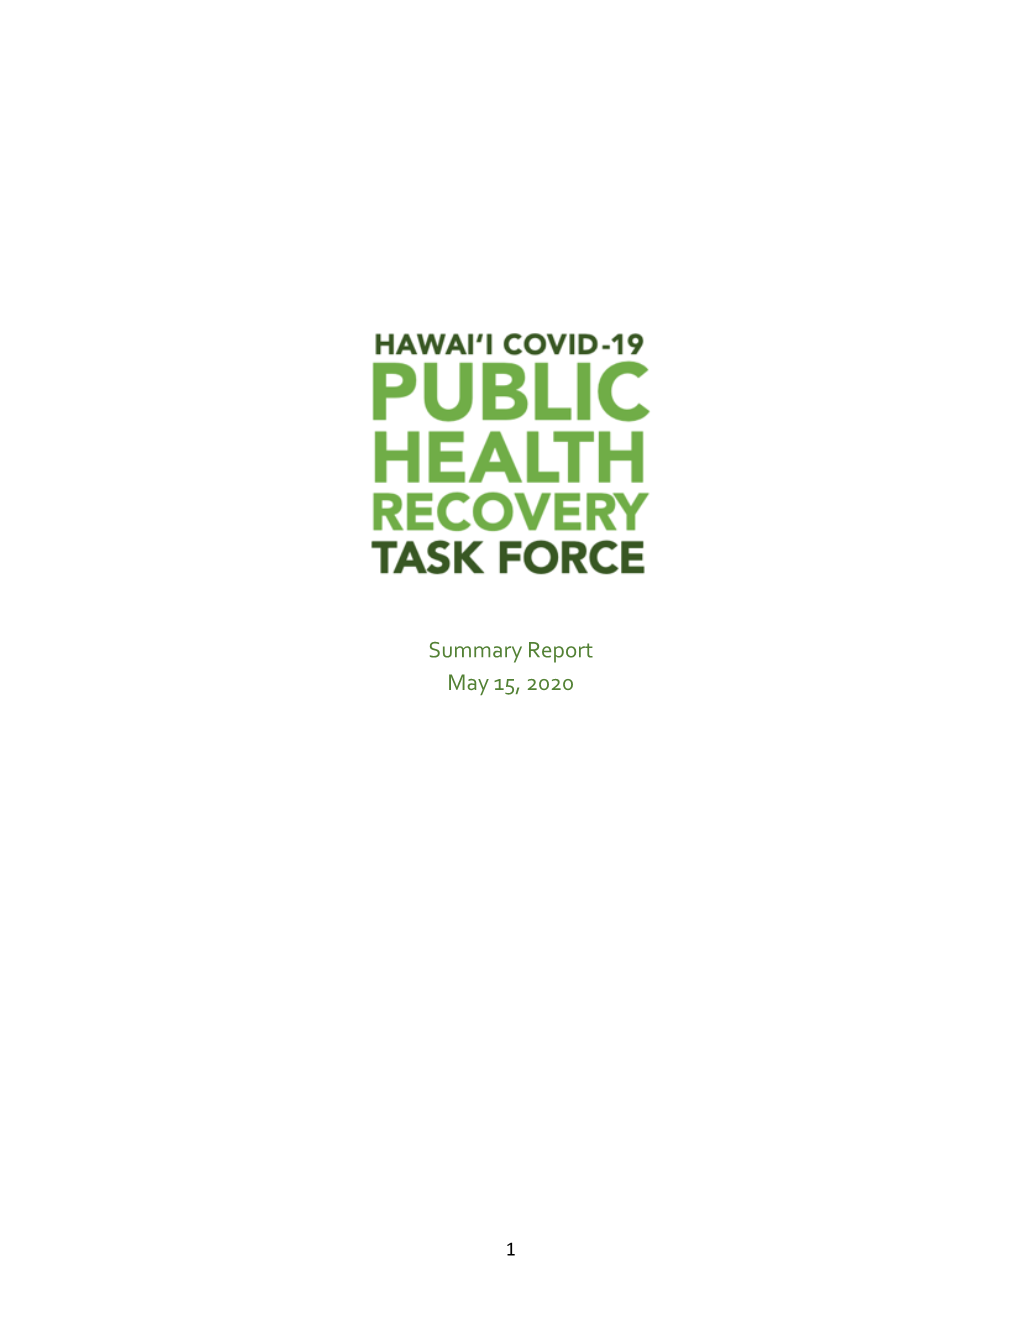 Public Health Recovery